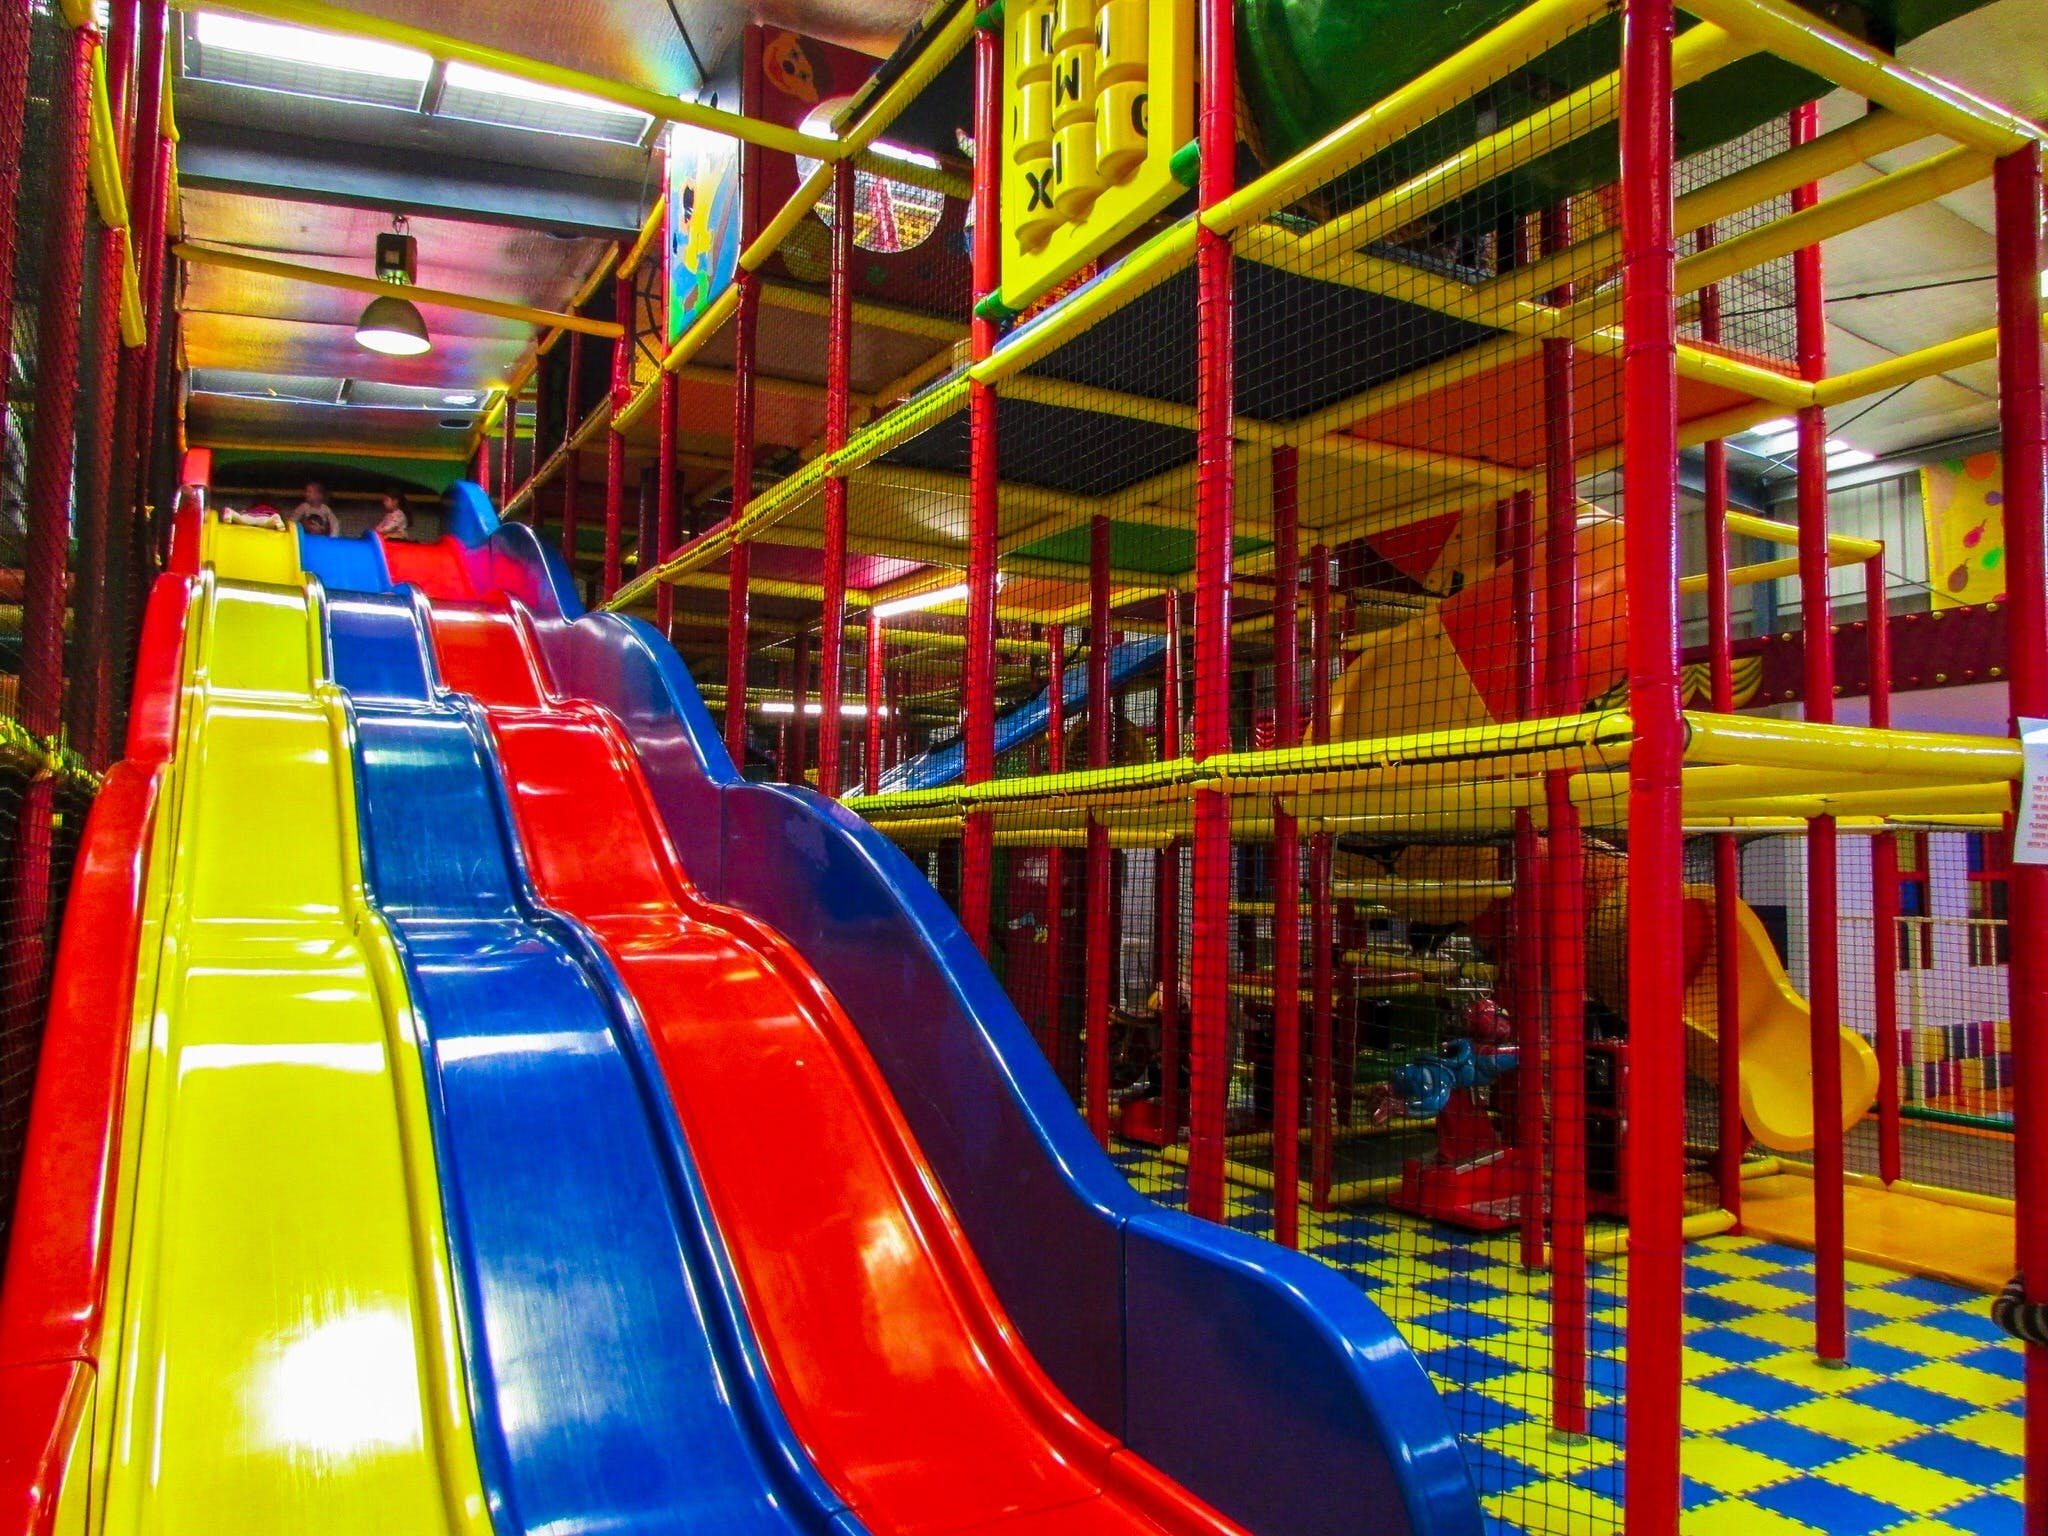 Kidz Shed Indoor Play Centre and Cafe - Australia Accommodation